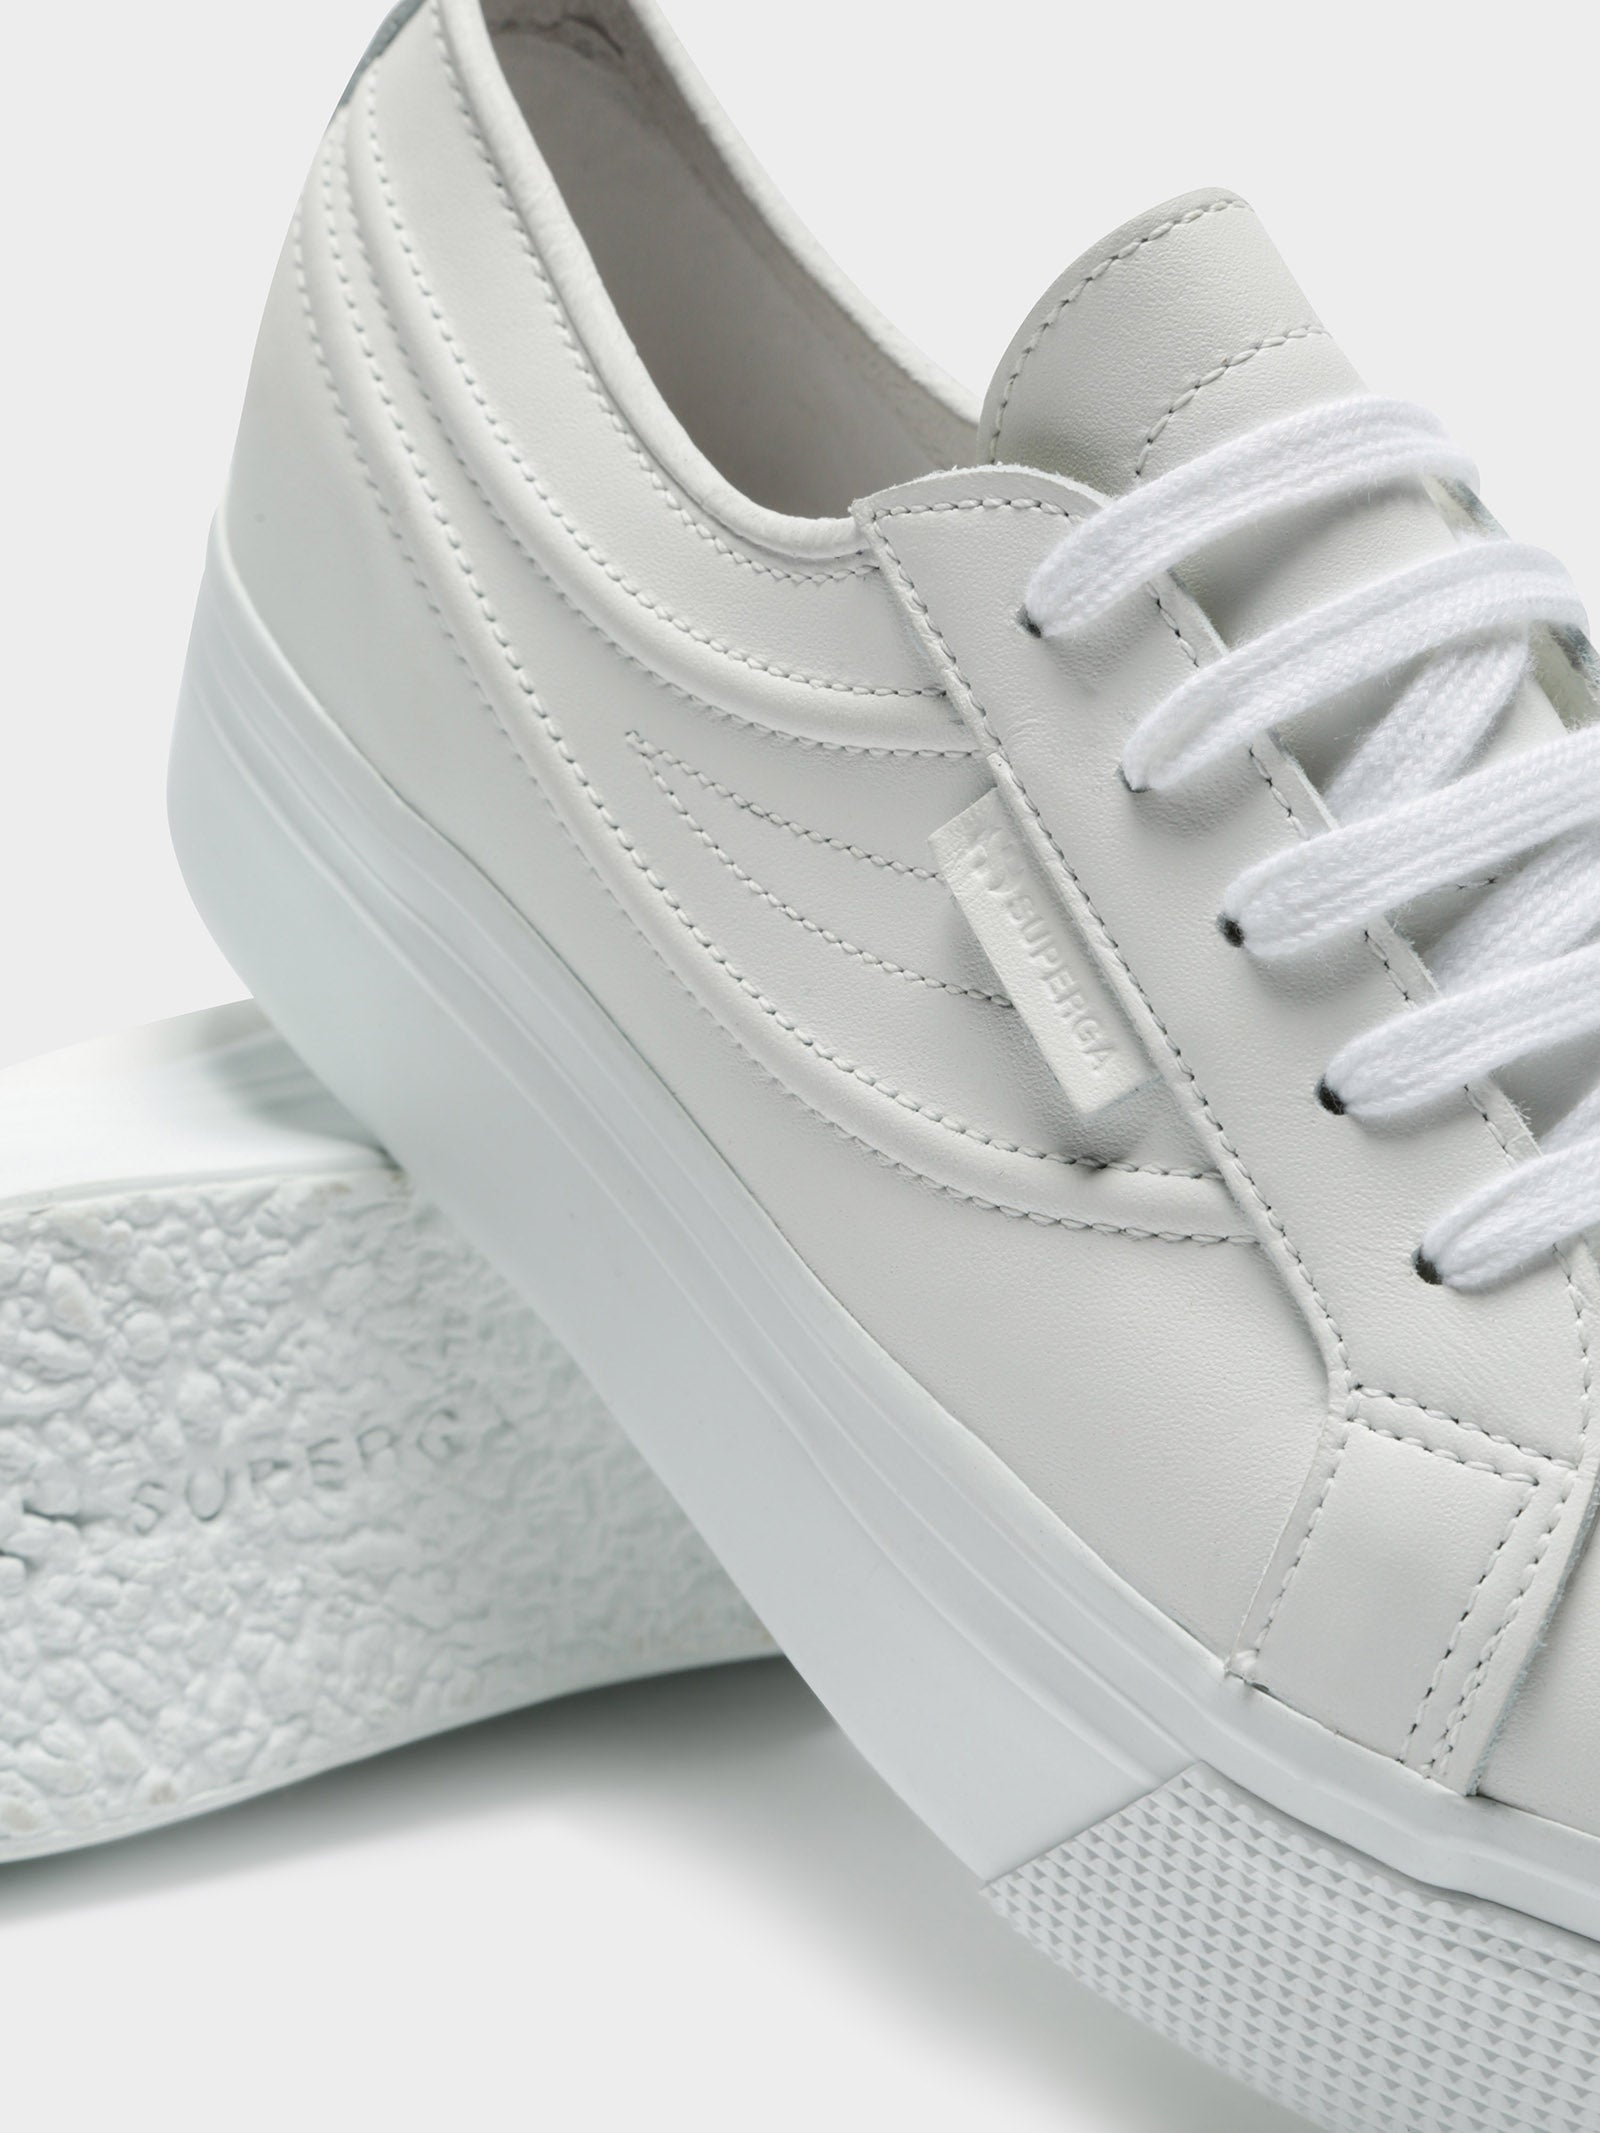 womens 2730 platform sneakers in white nappa leather